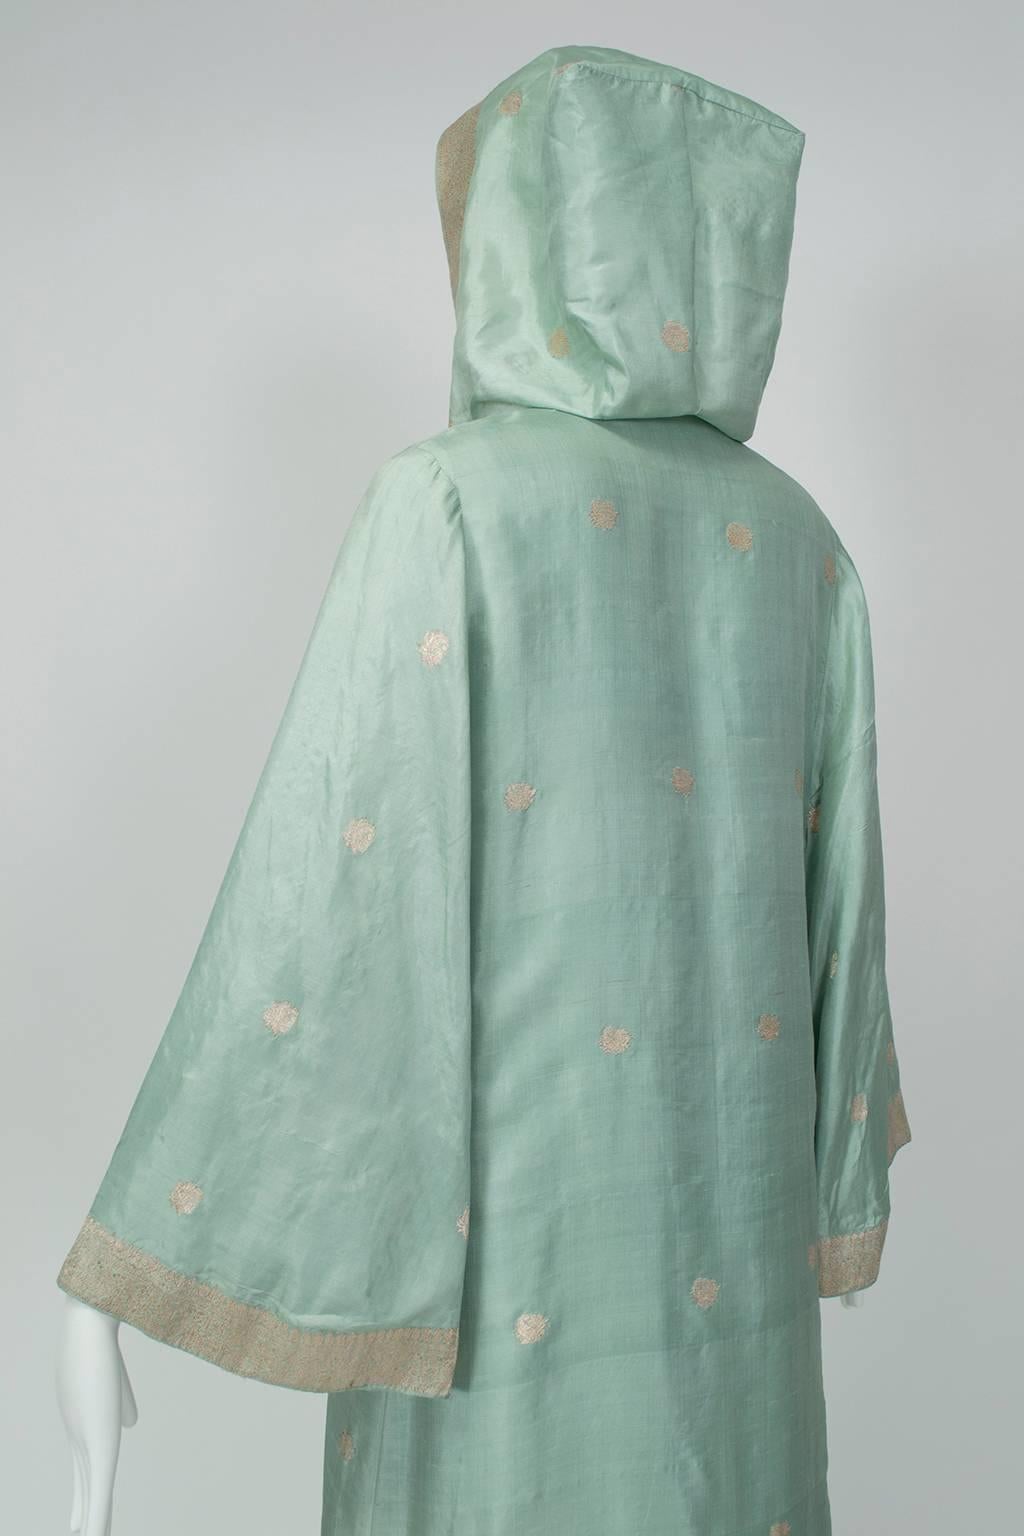 Green Sari Silk and Gold Thread Hooded Kaftan w Provenance, Tunisia - M, 1970s In Good Condition For Sale In Tucson, AZ